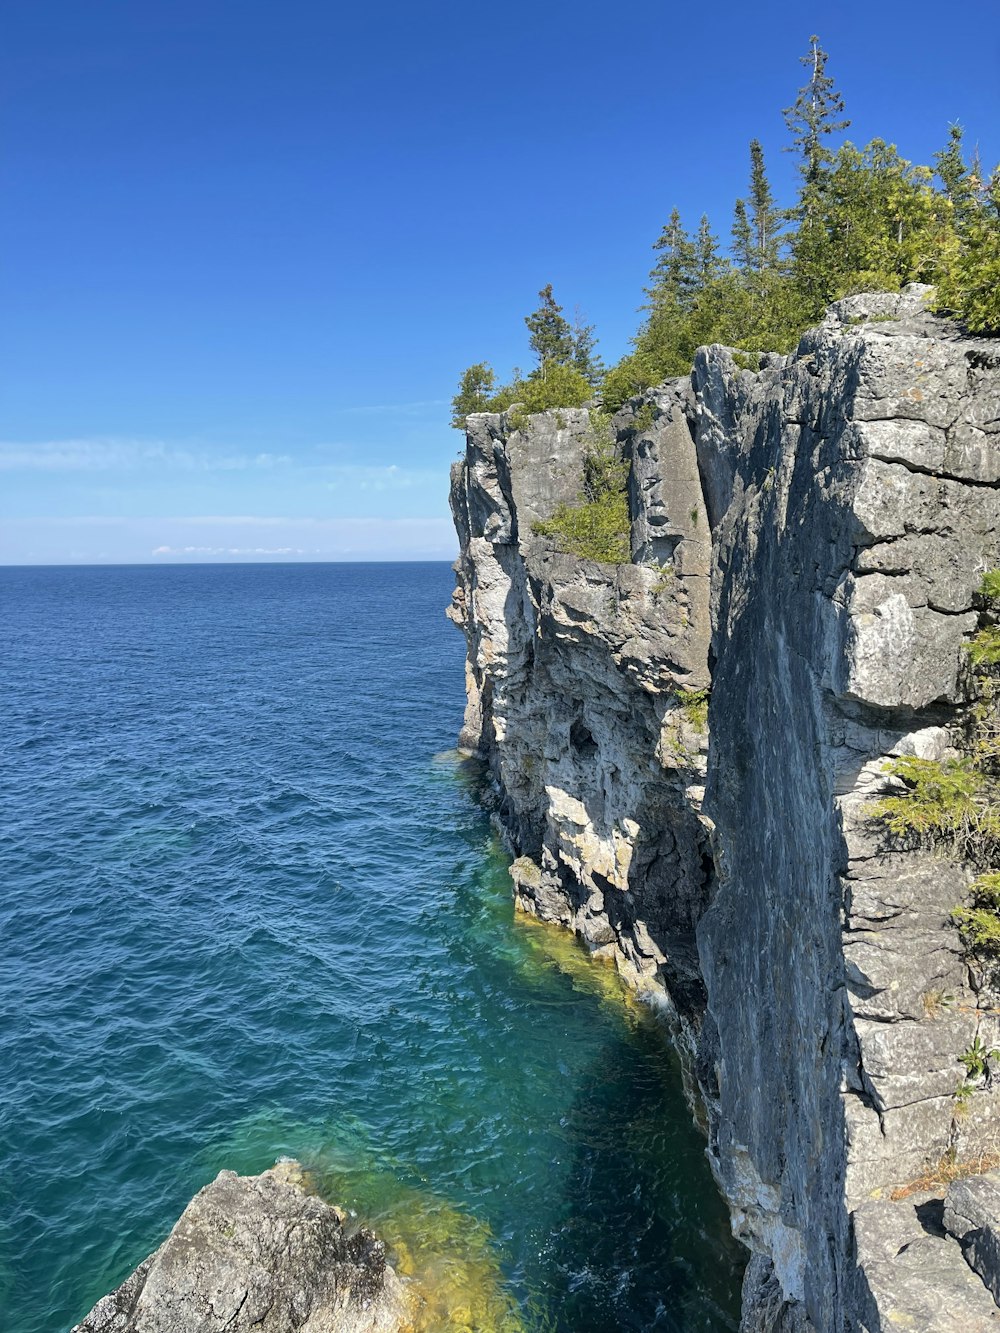 a cliff side with a body of water below with Bruce Peninsula National Park in the background